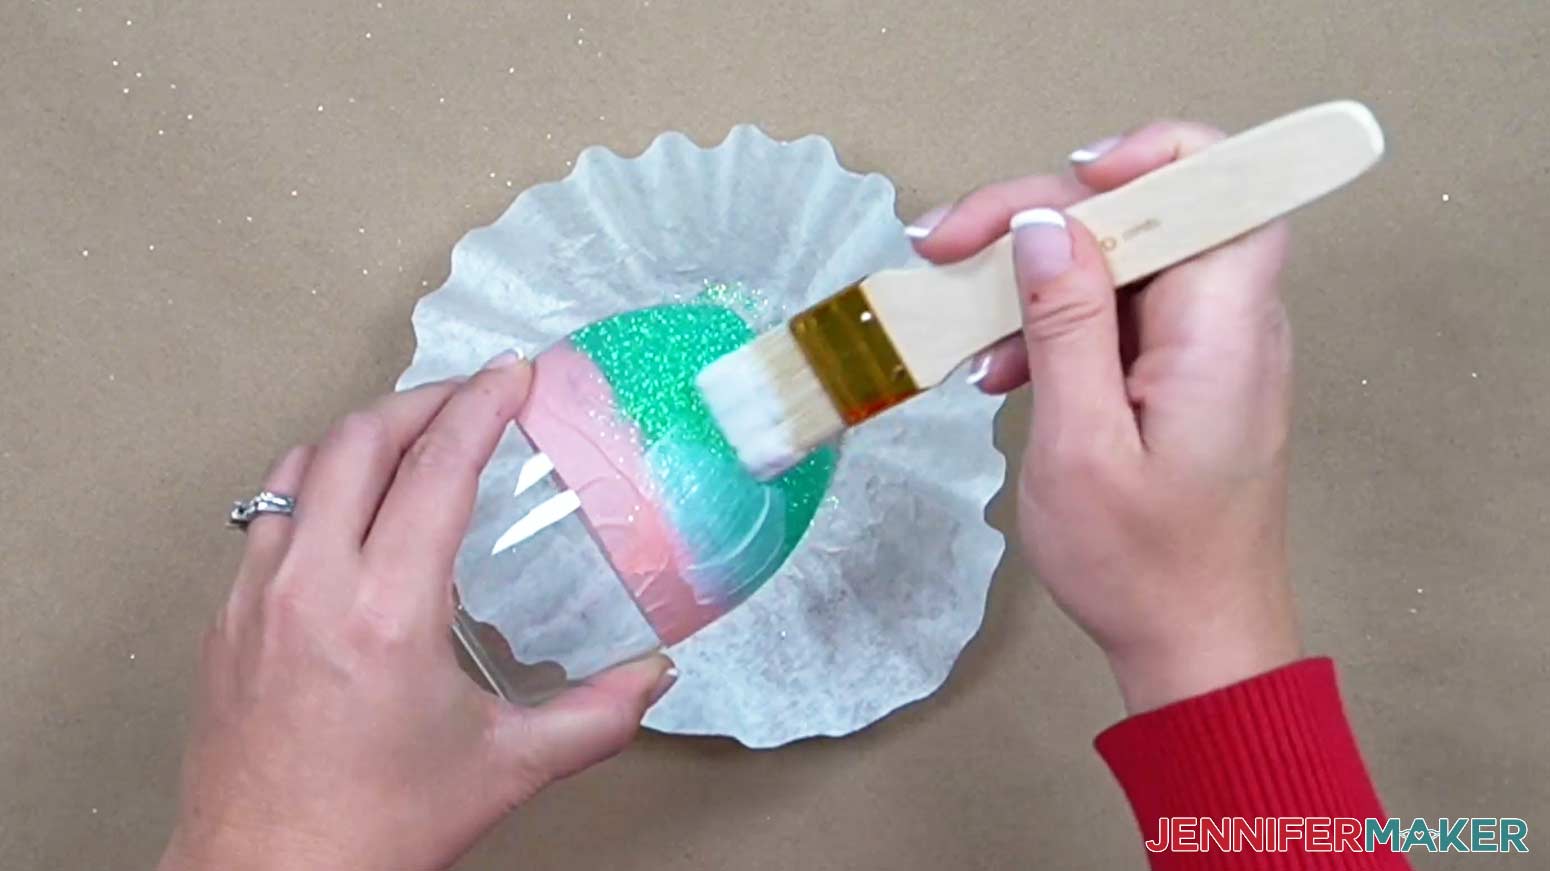 Use the paintbrush to paint a second coat of Mod Podge onto the first layer after it dries.